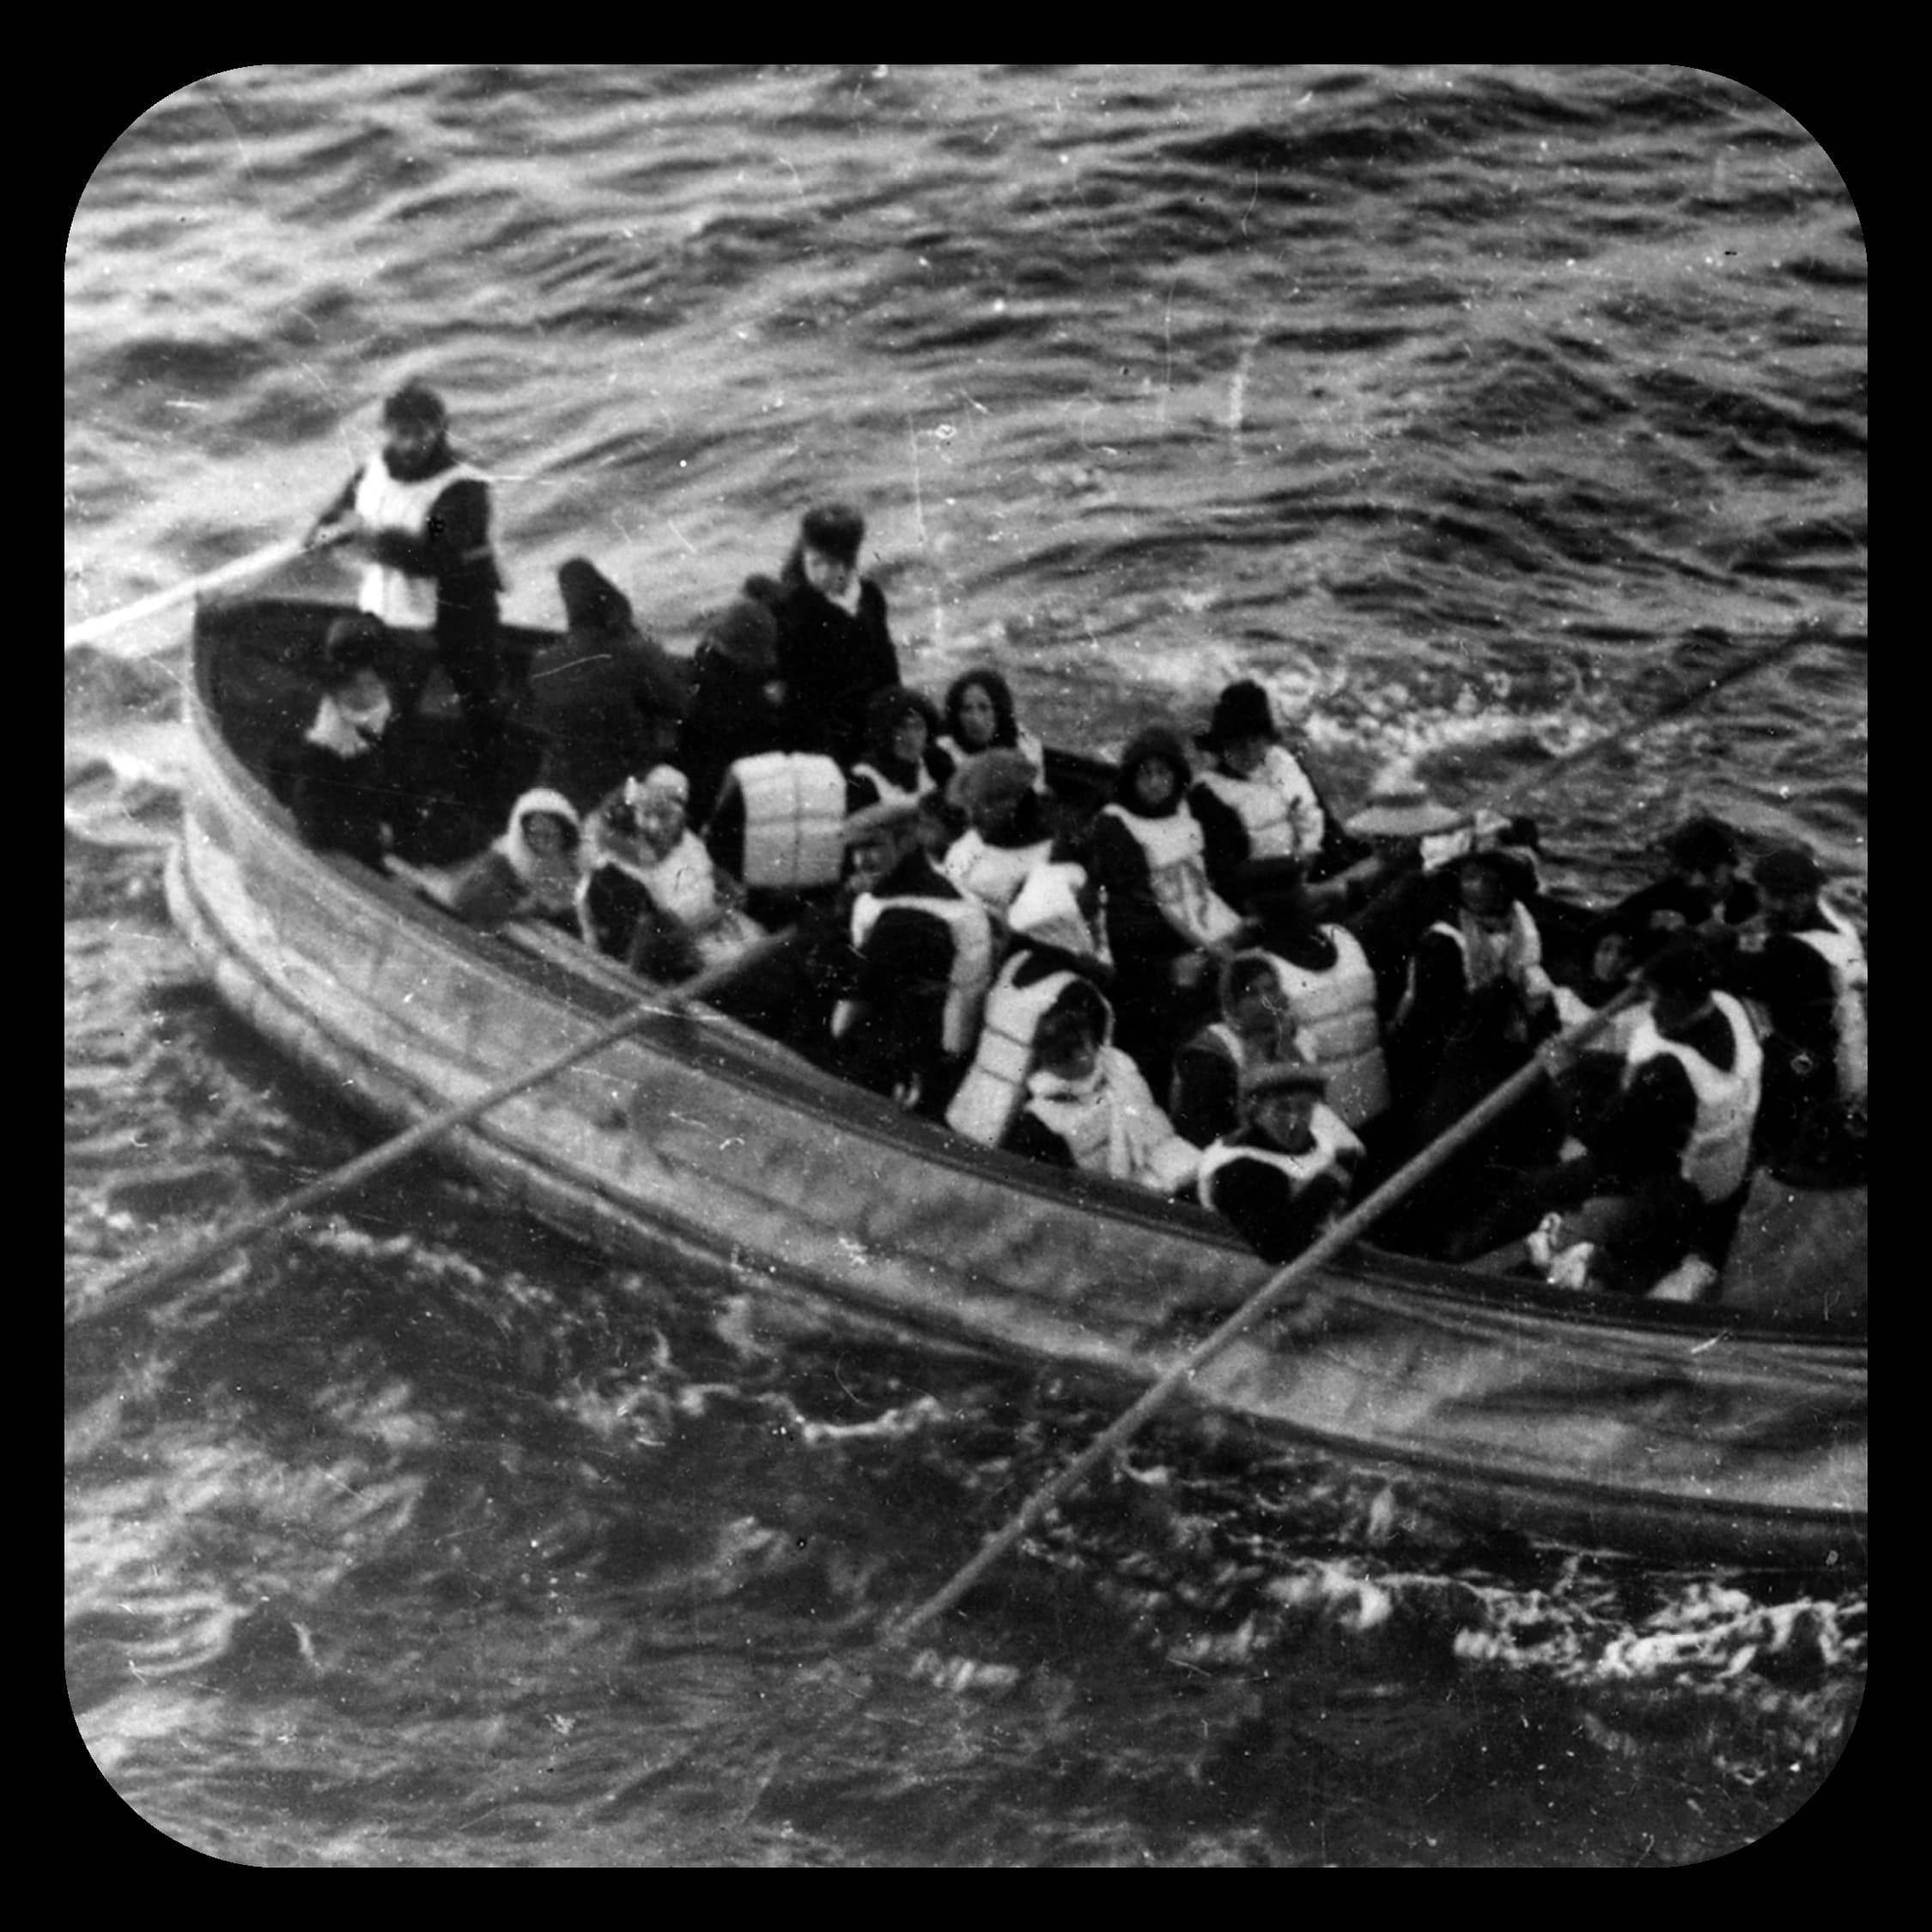 12:45 a.m. – First lifeboats are lowered 2:18 a.m. – Bow sinks 3:30 a.m. – Survivors are rescued by Carpathia.